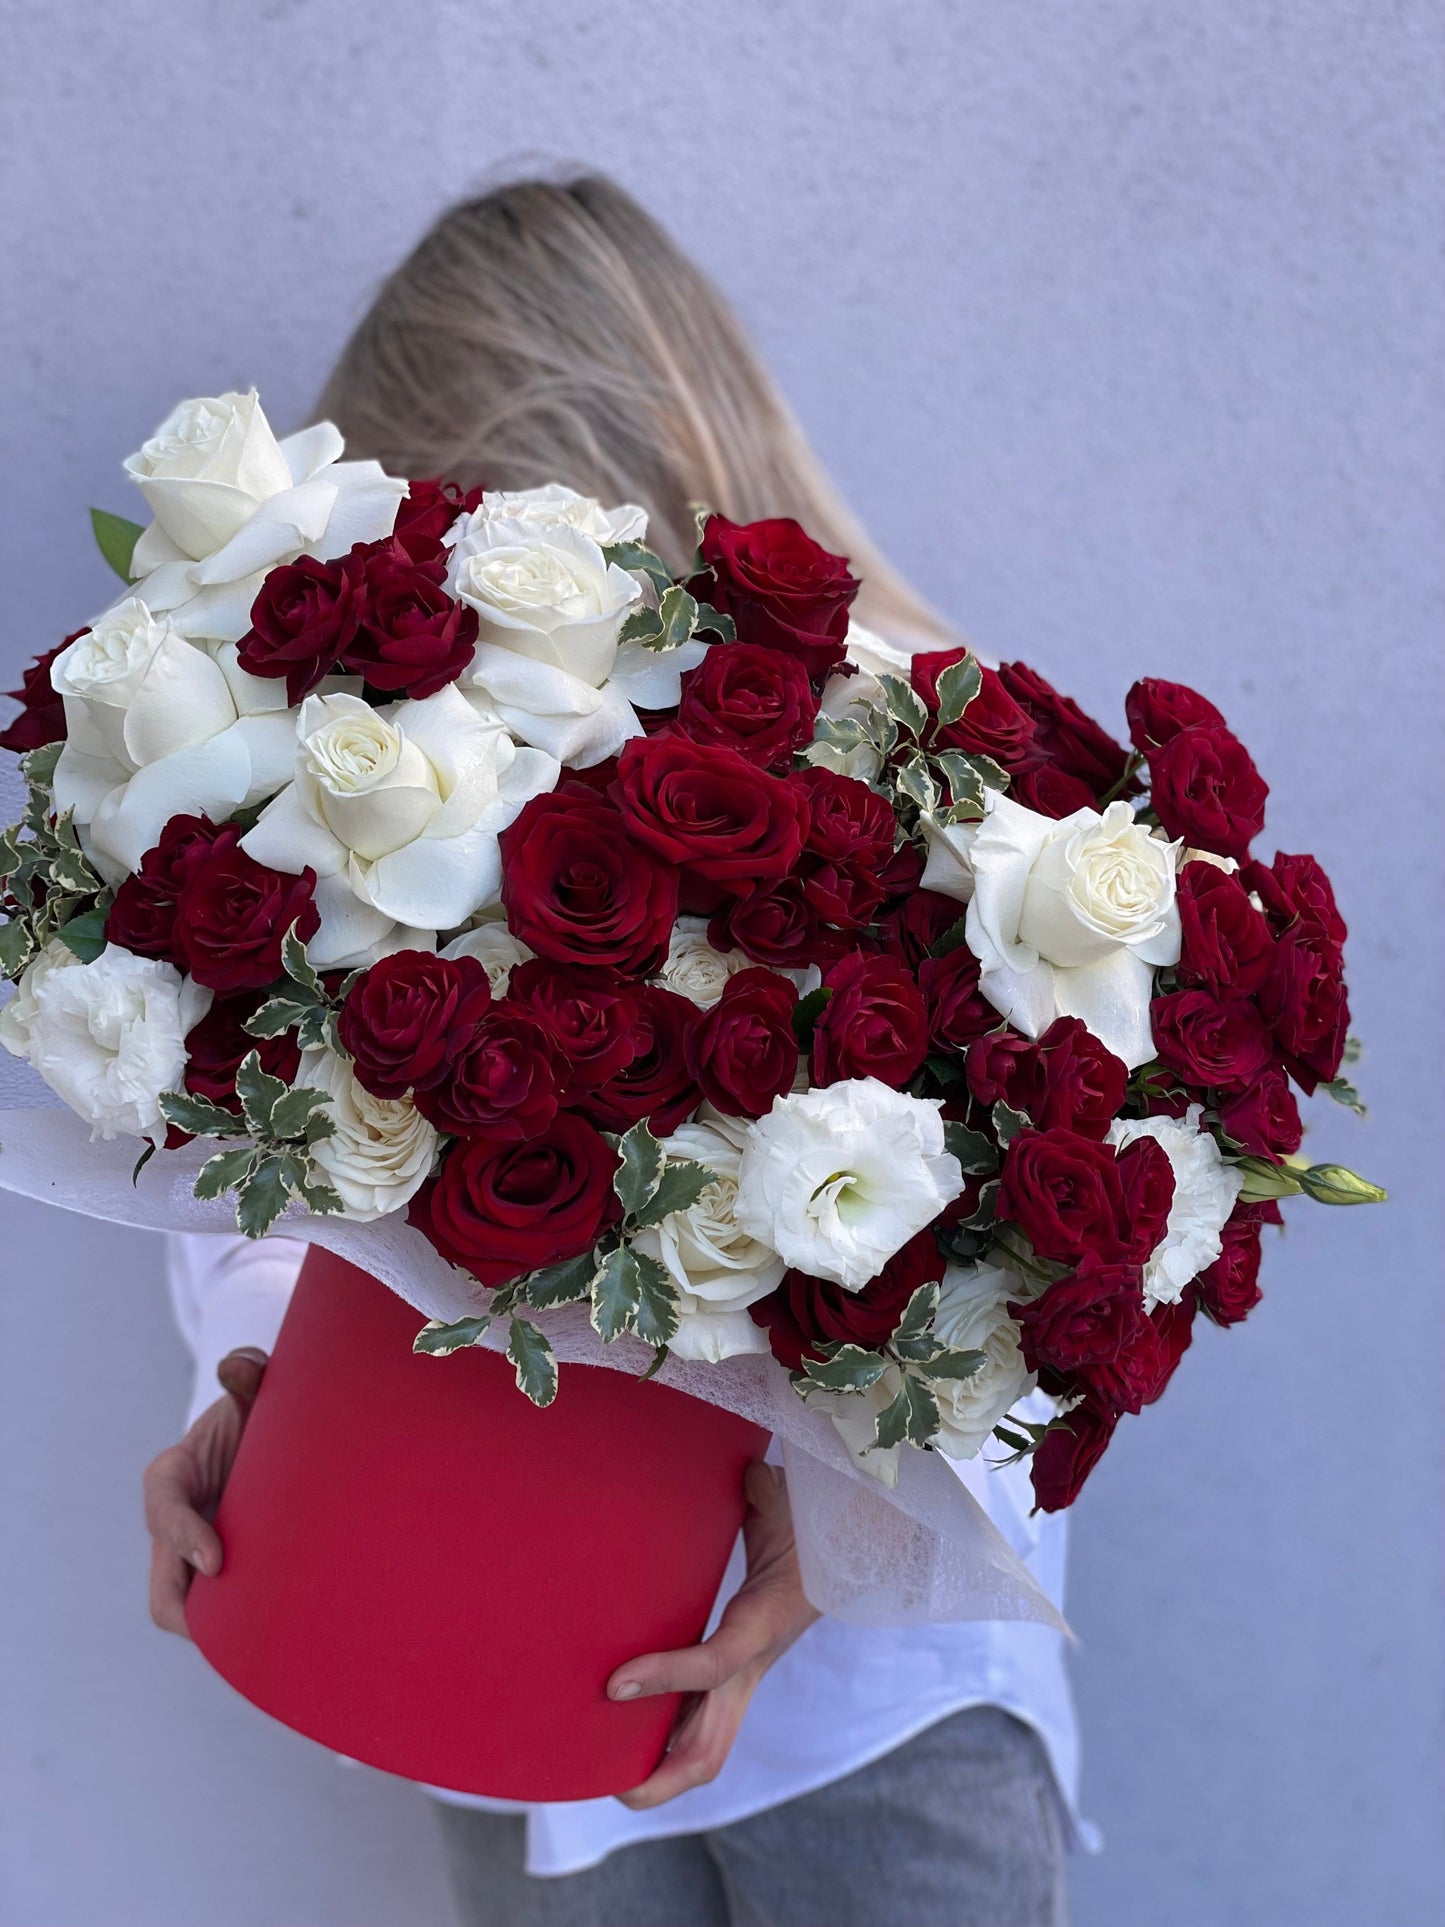 Mix of white and red roses